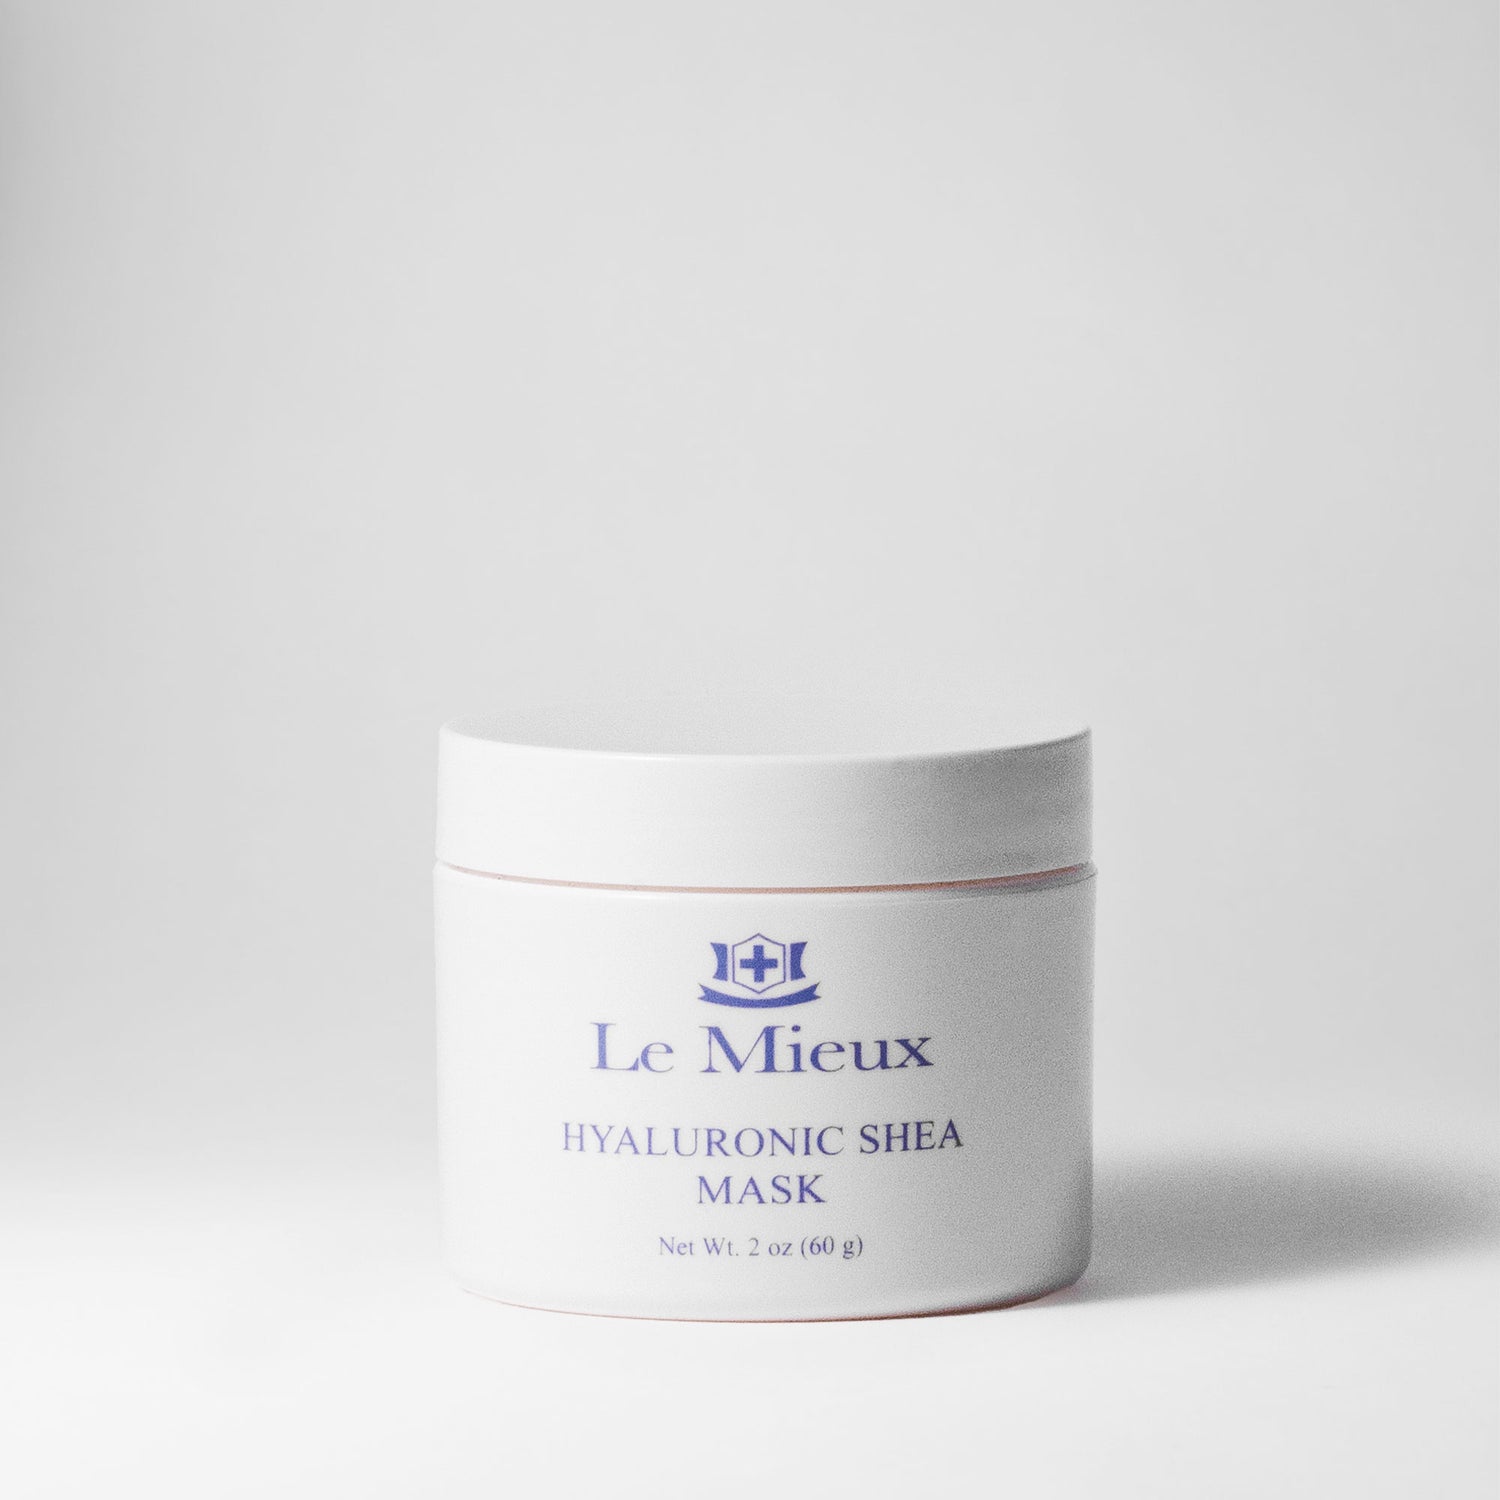  HYALURONIC SHEA MASK from Le Mieux Skincare - 1